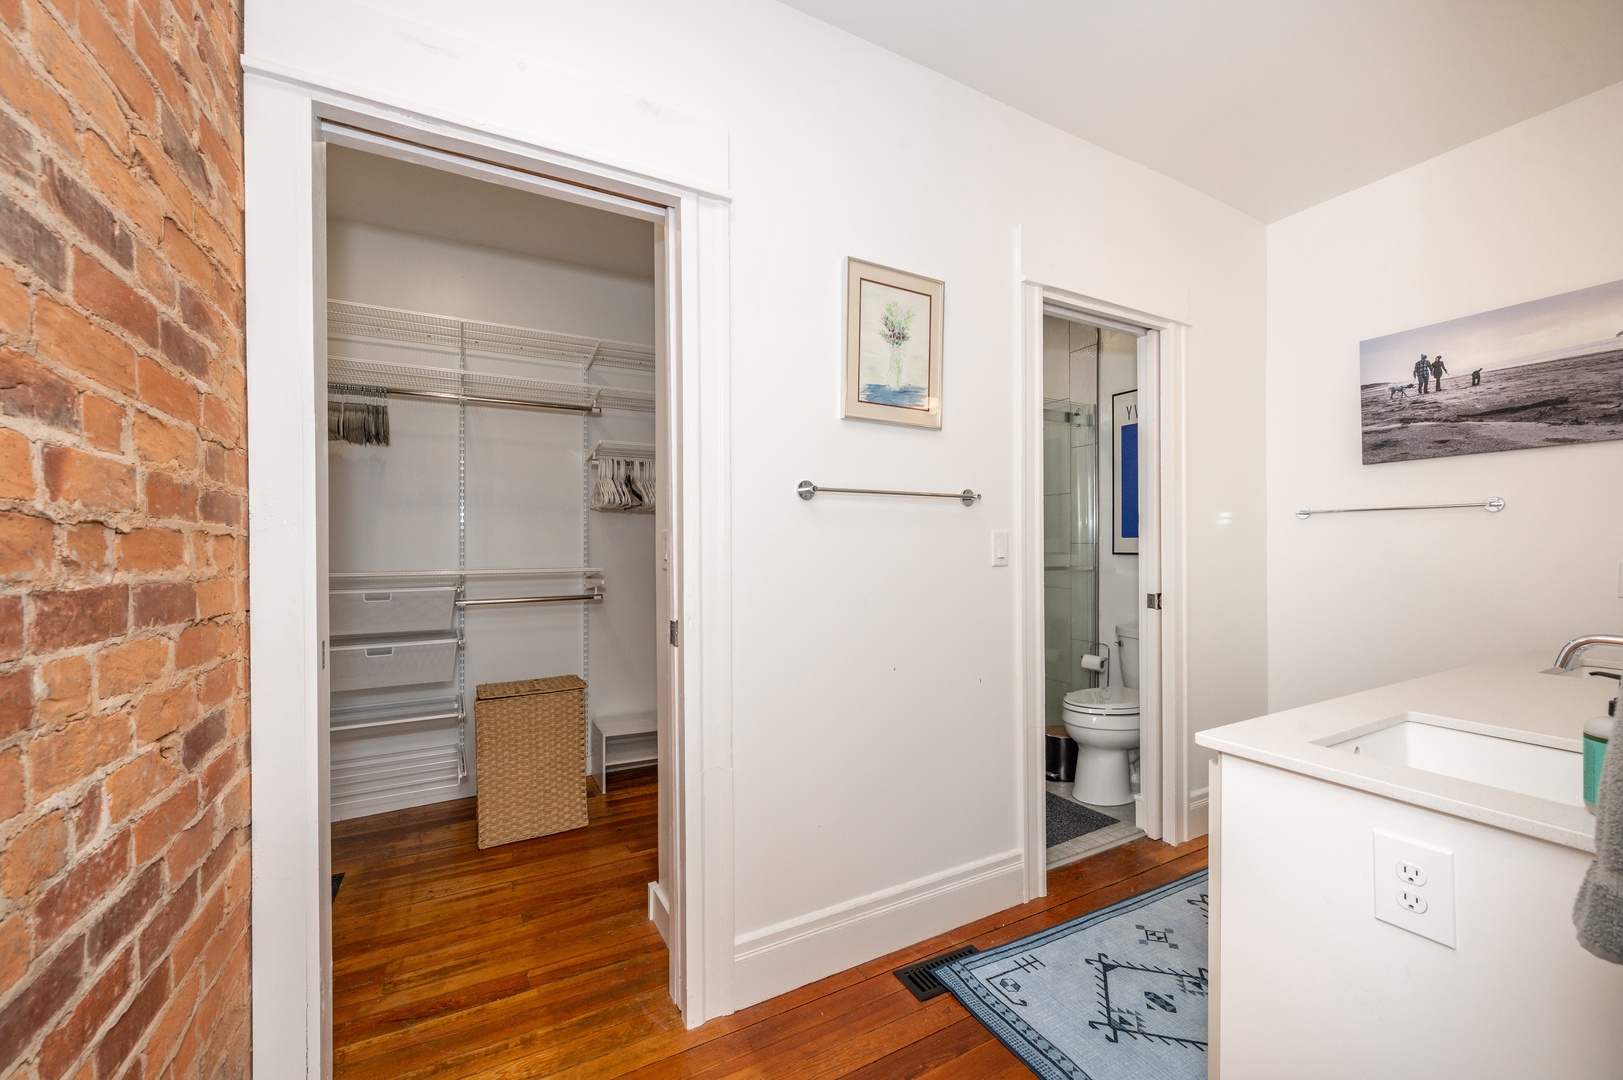 The 2nd floor king suite boasts a stylish private ensuite & walk-in closet